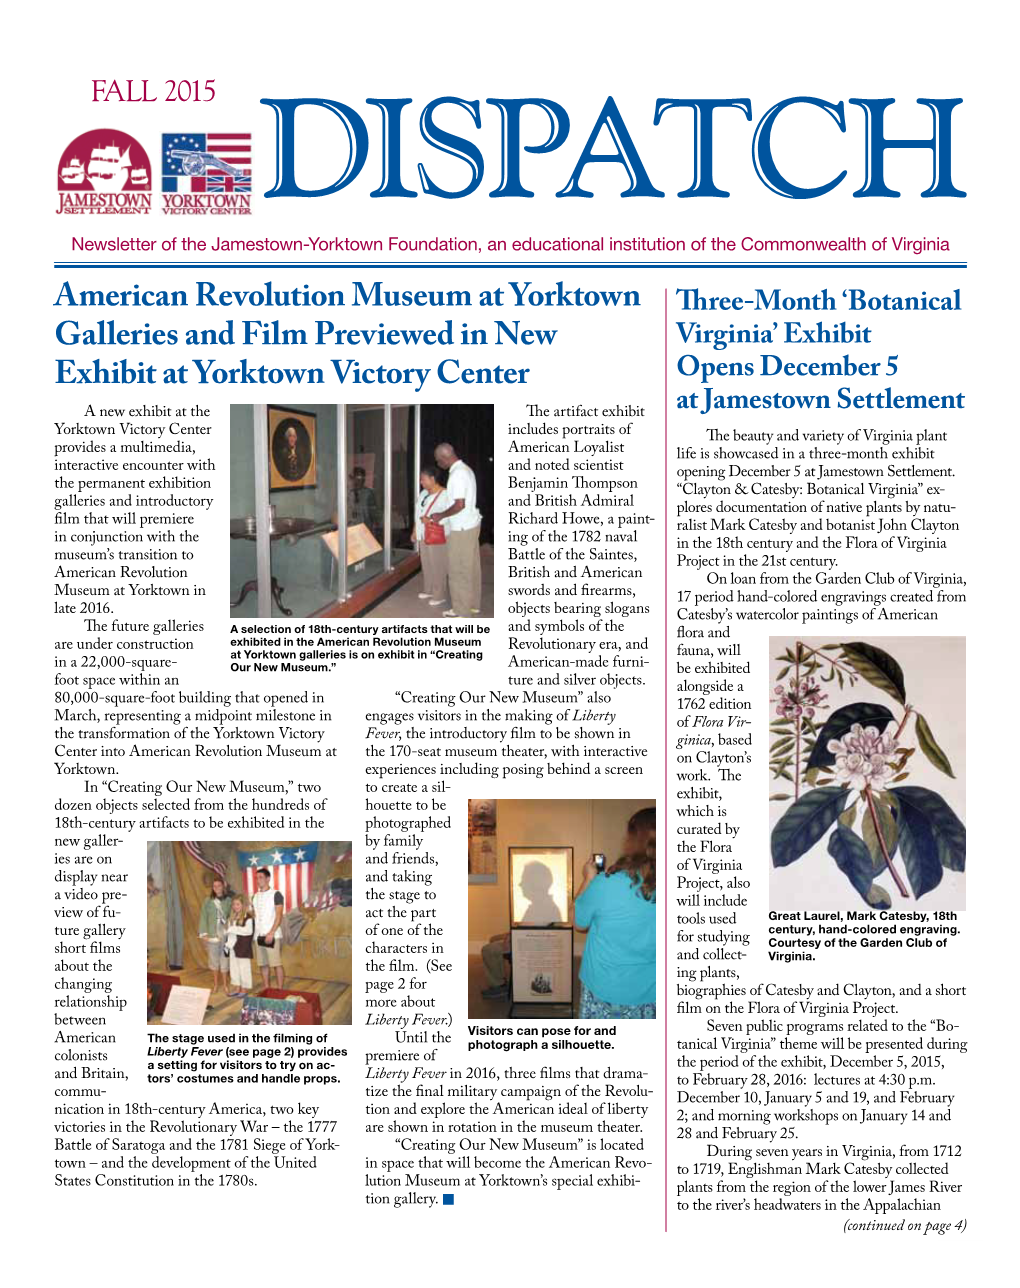 FALL 2015 DISPATCH Newsletter of the Jamestown-Yorktown Foundation, an Educational Institution of the Commonwealth of Virginia